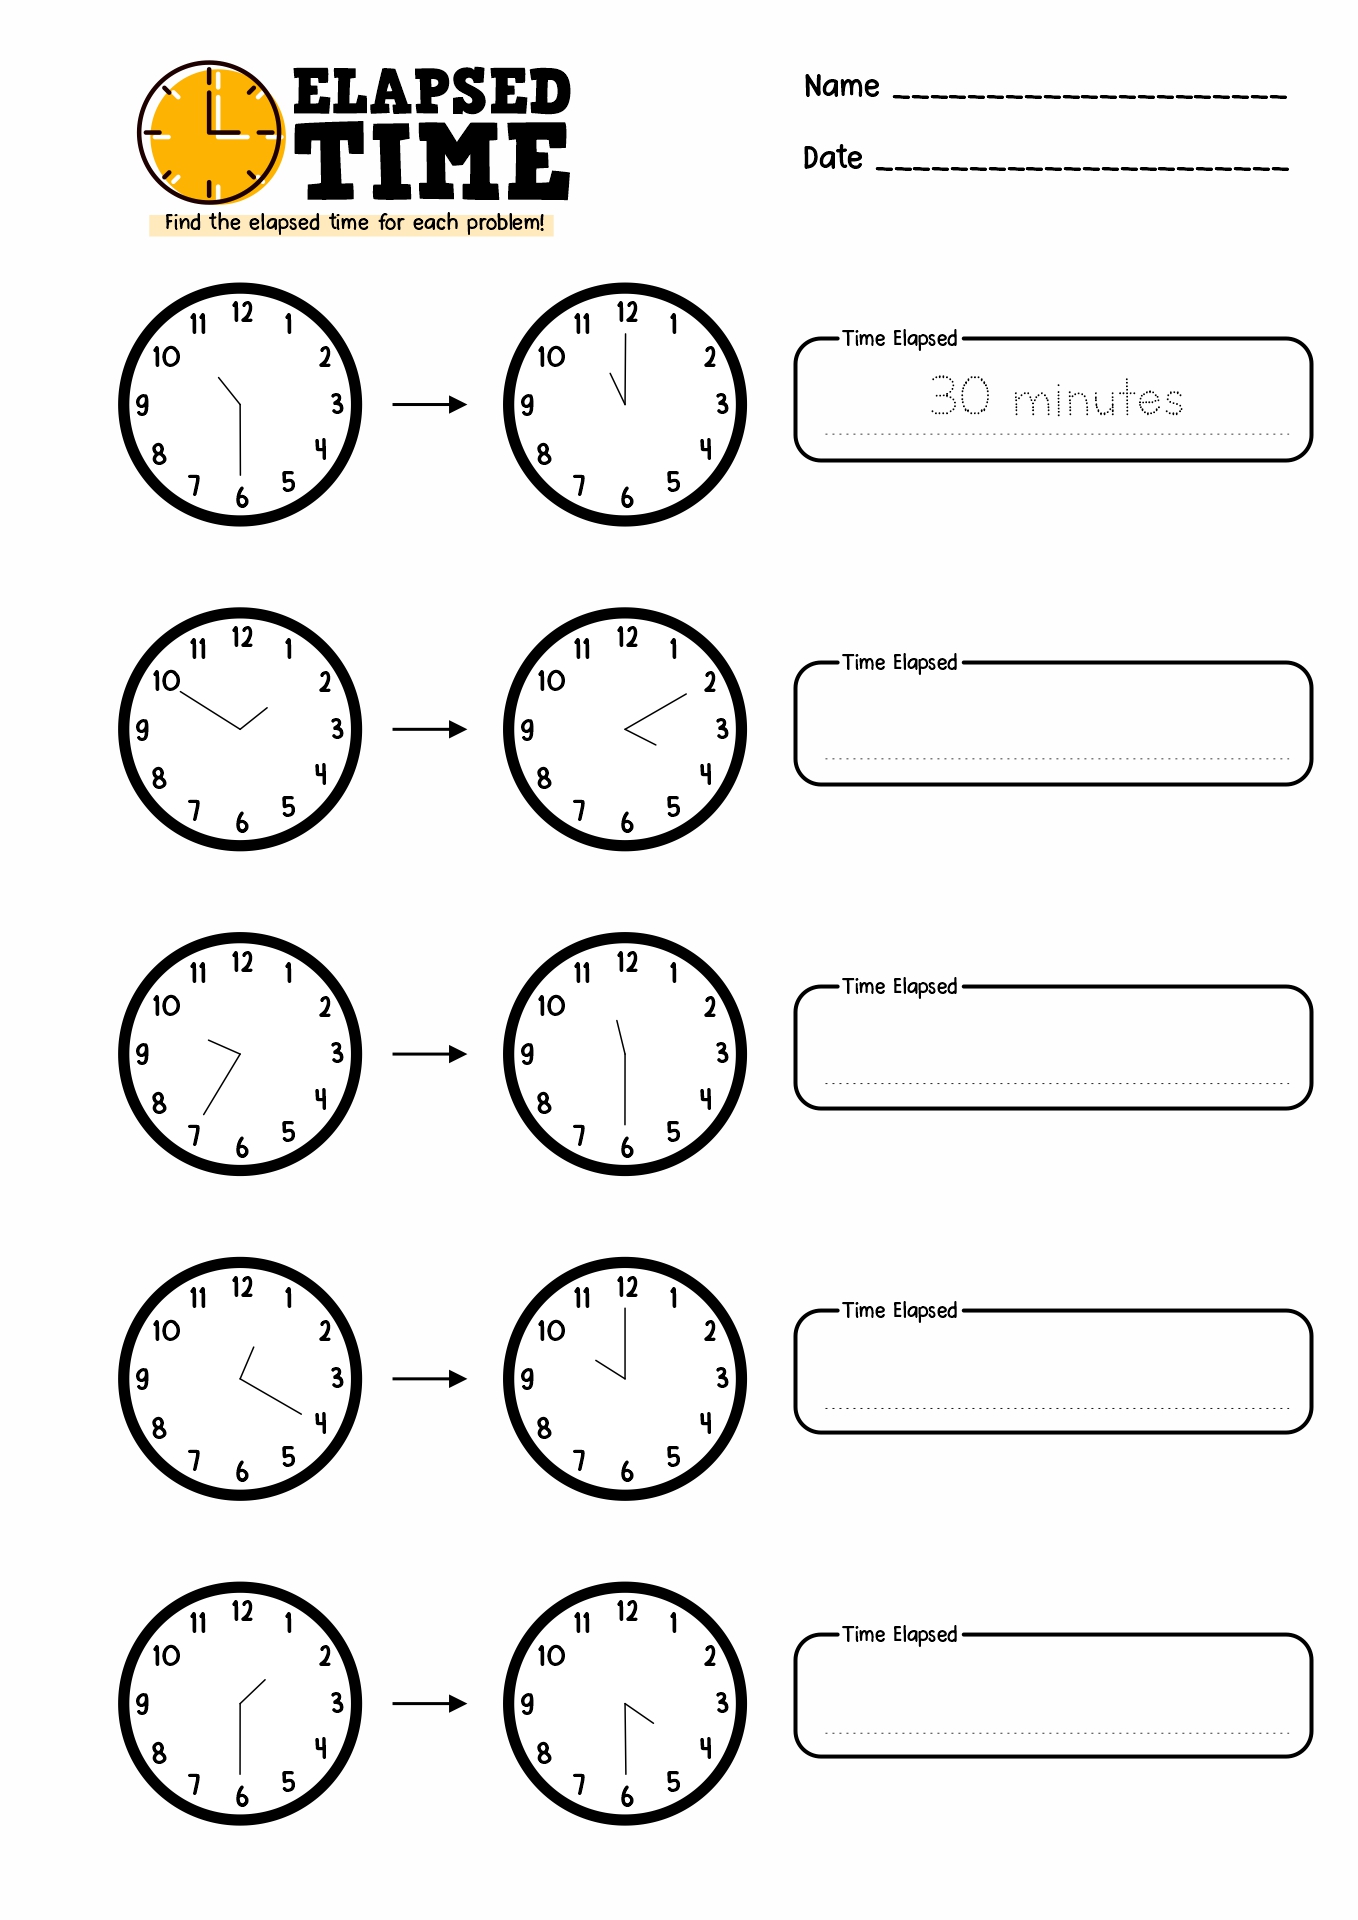 Elapsed Time Problems 4th Grade Image